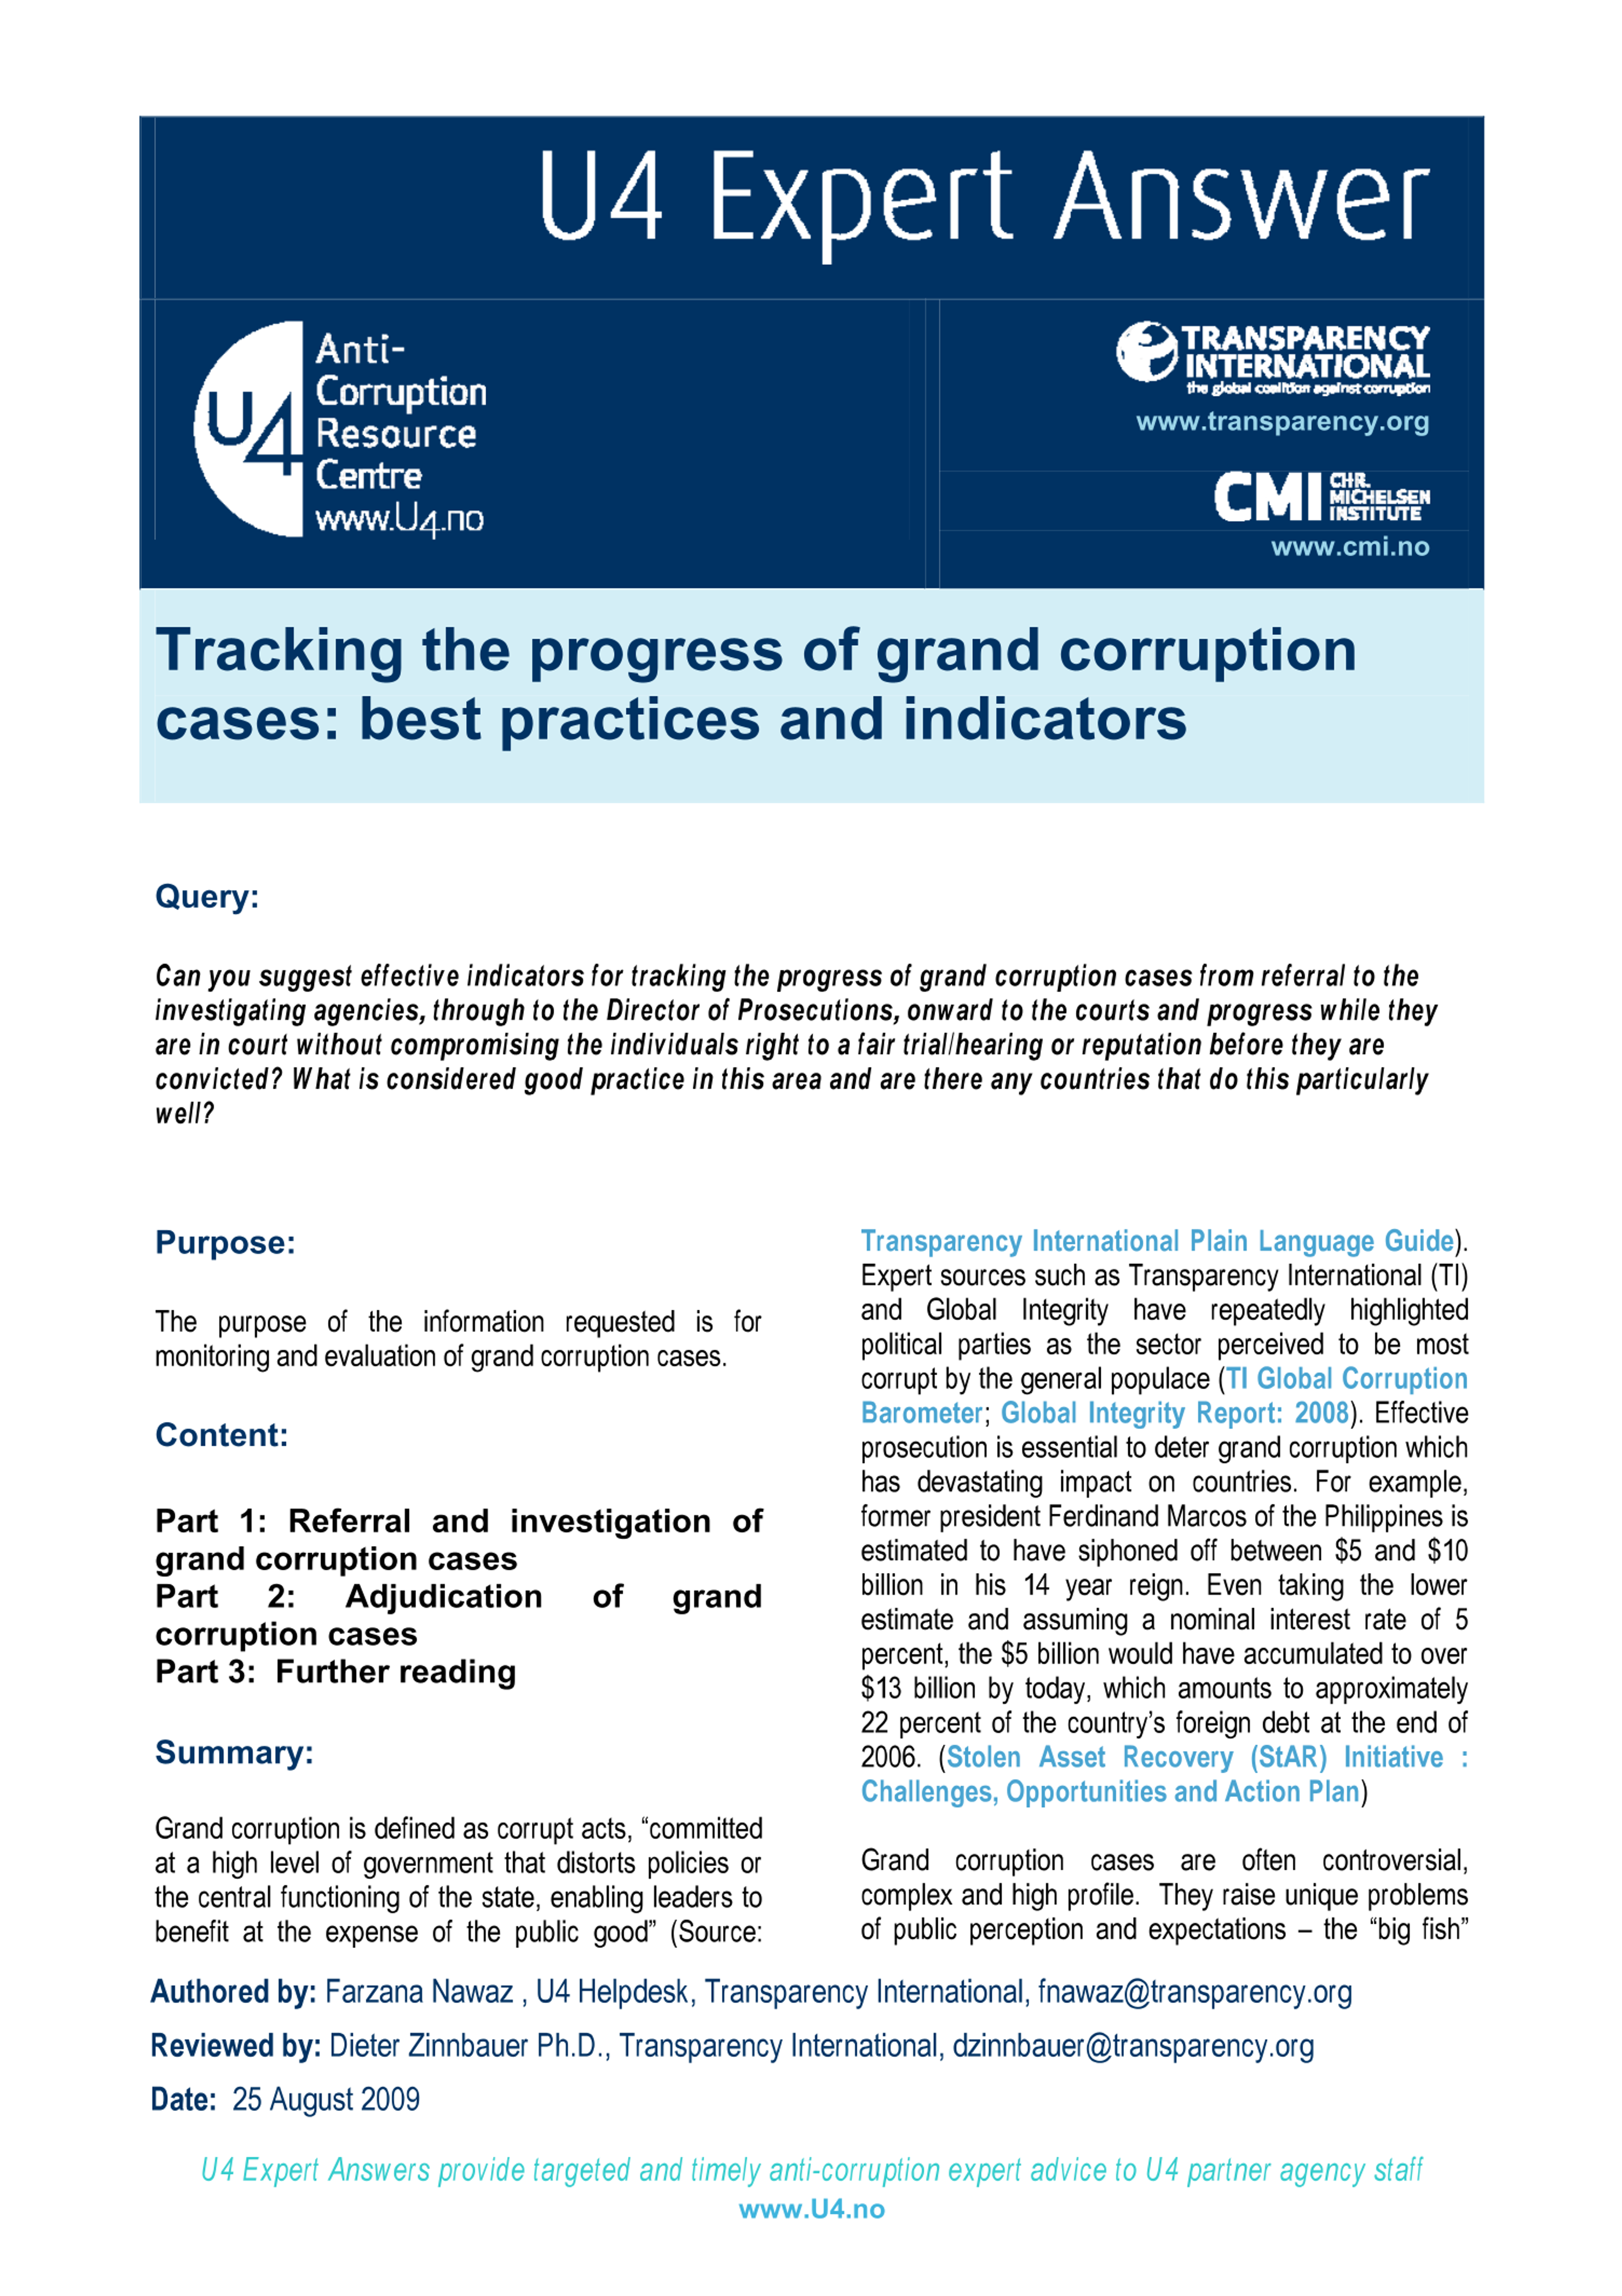 Tracking the progress of grand corruption cases: best practices and indicators